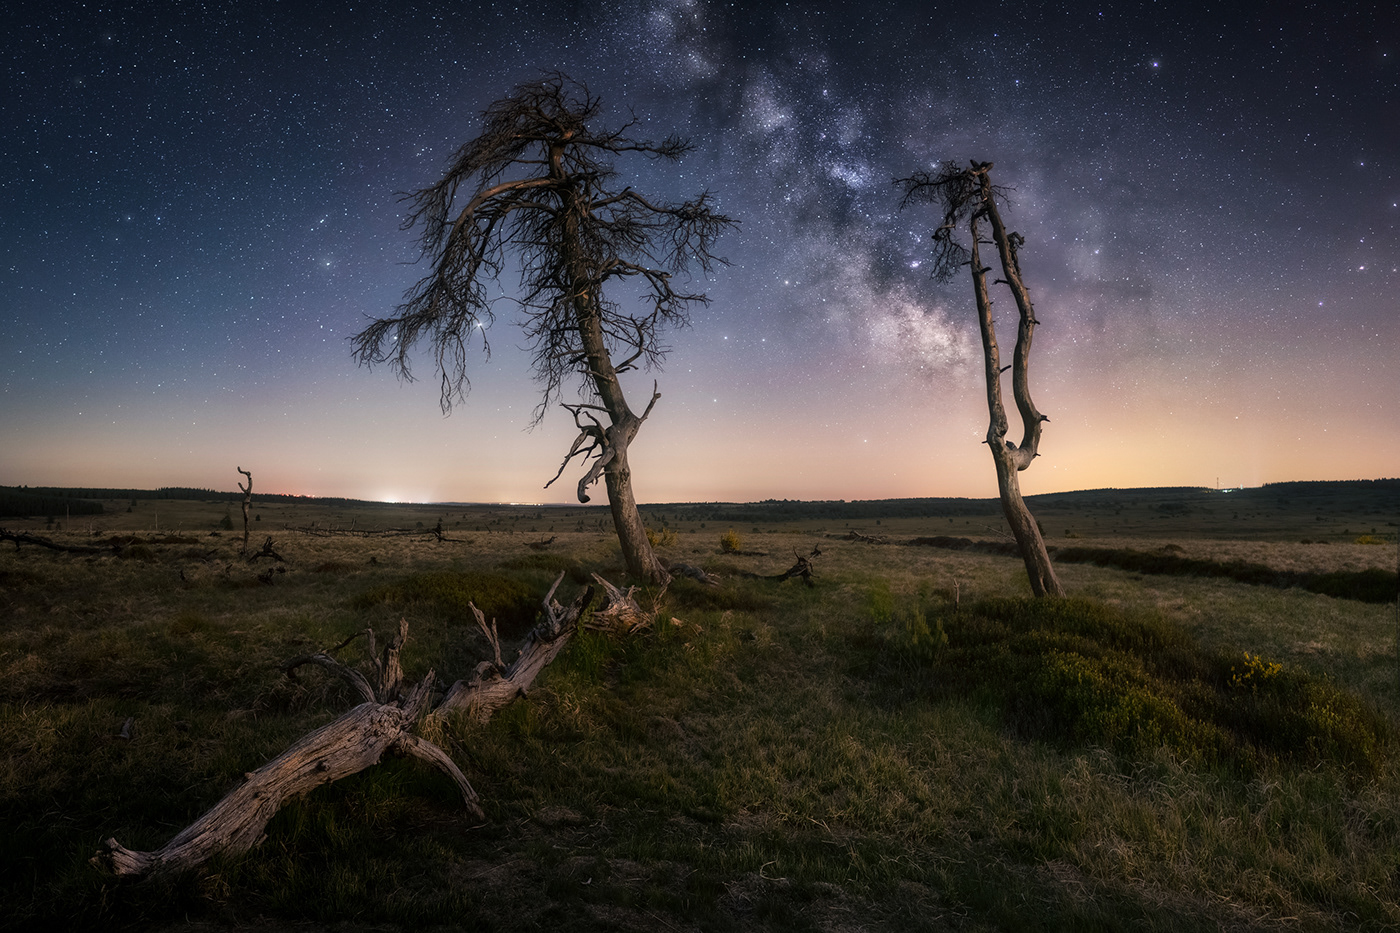 Core of the milky way with burnt pine trees in the foreground in a desolated area of Belgium